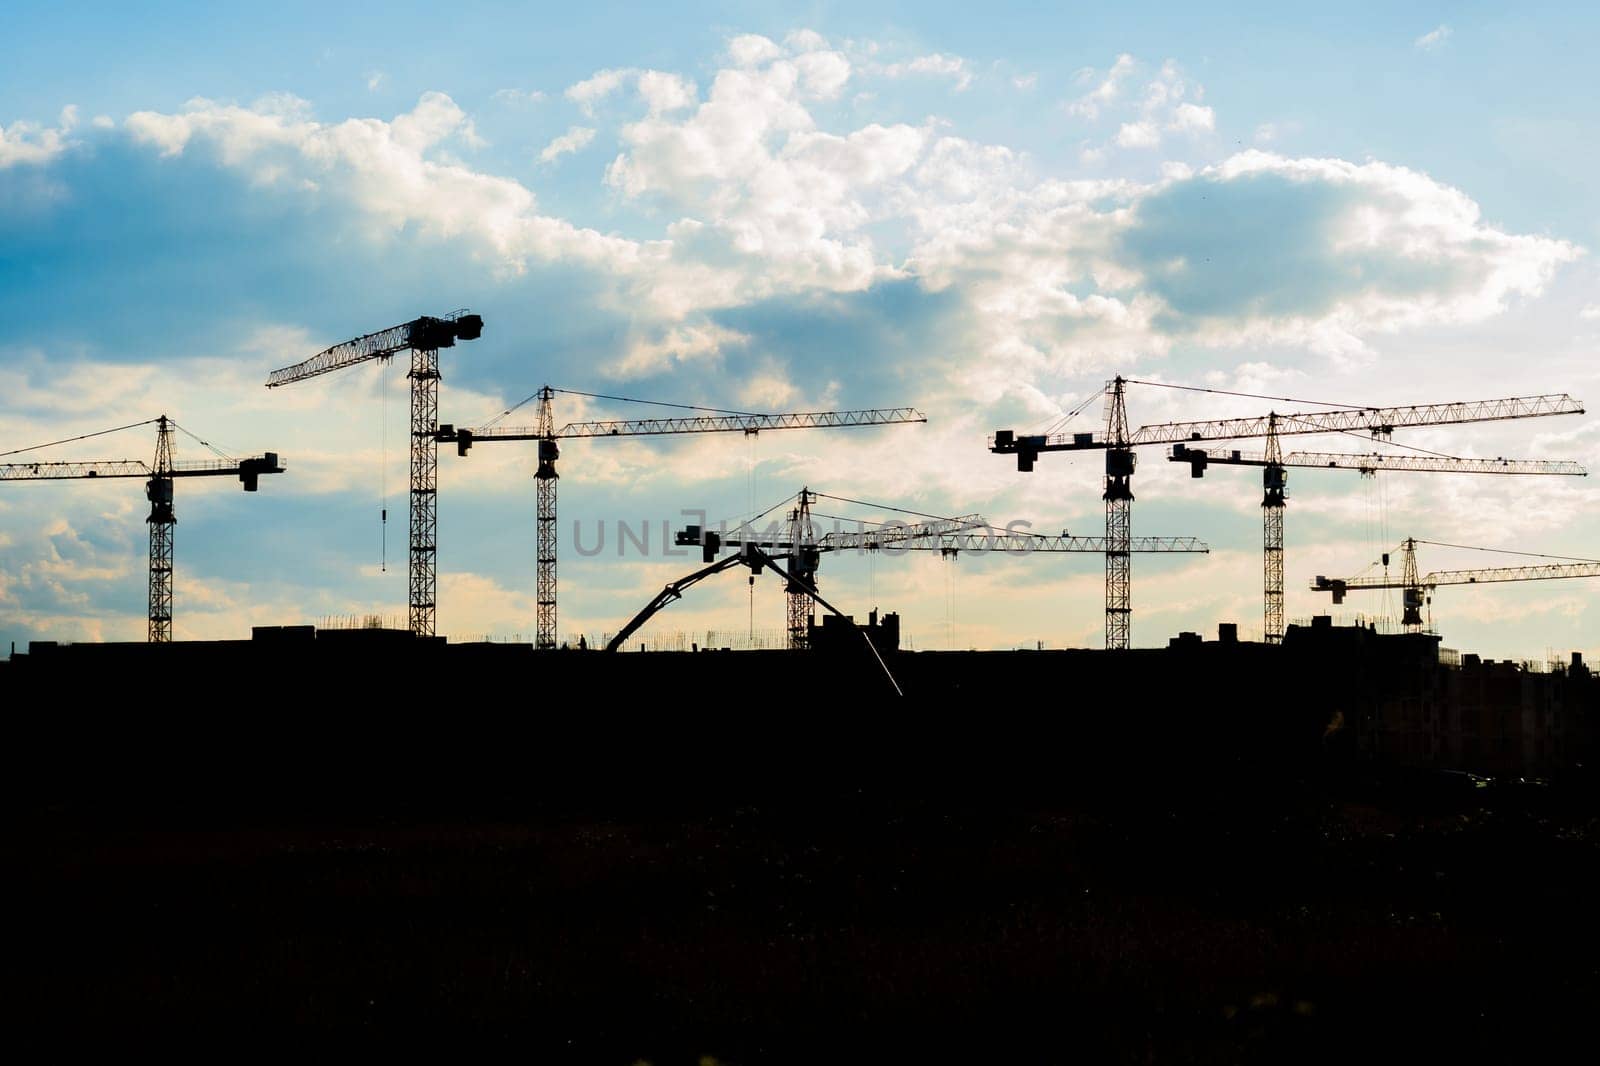 Industrial construction cranes and building silhouettes over sun at sunrise. by DovidPro